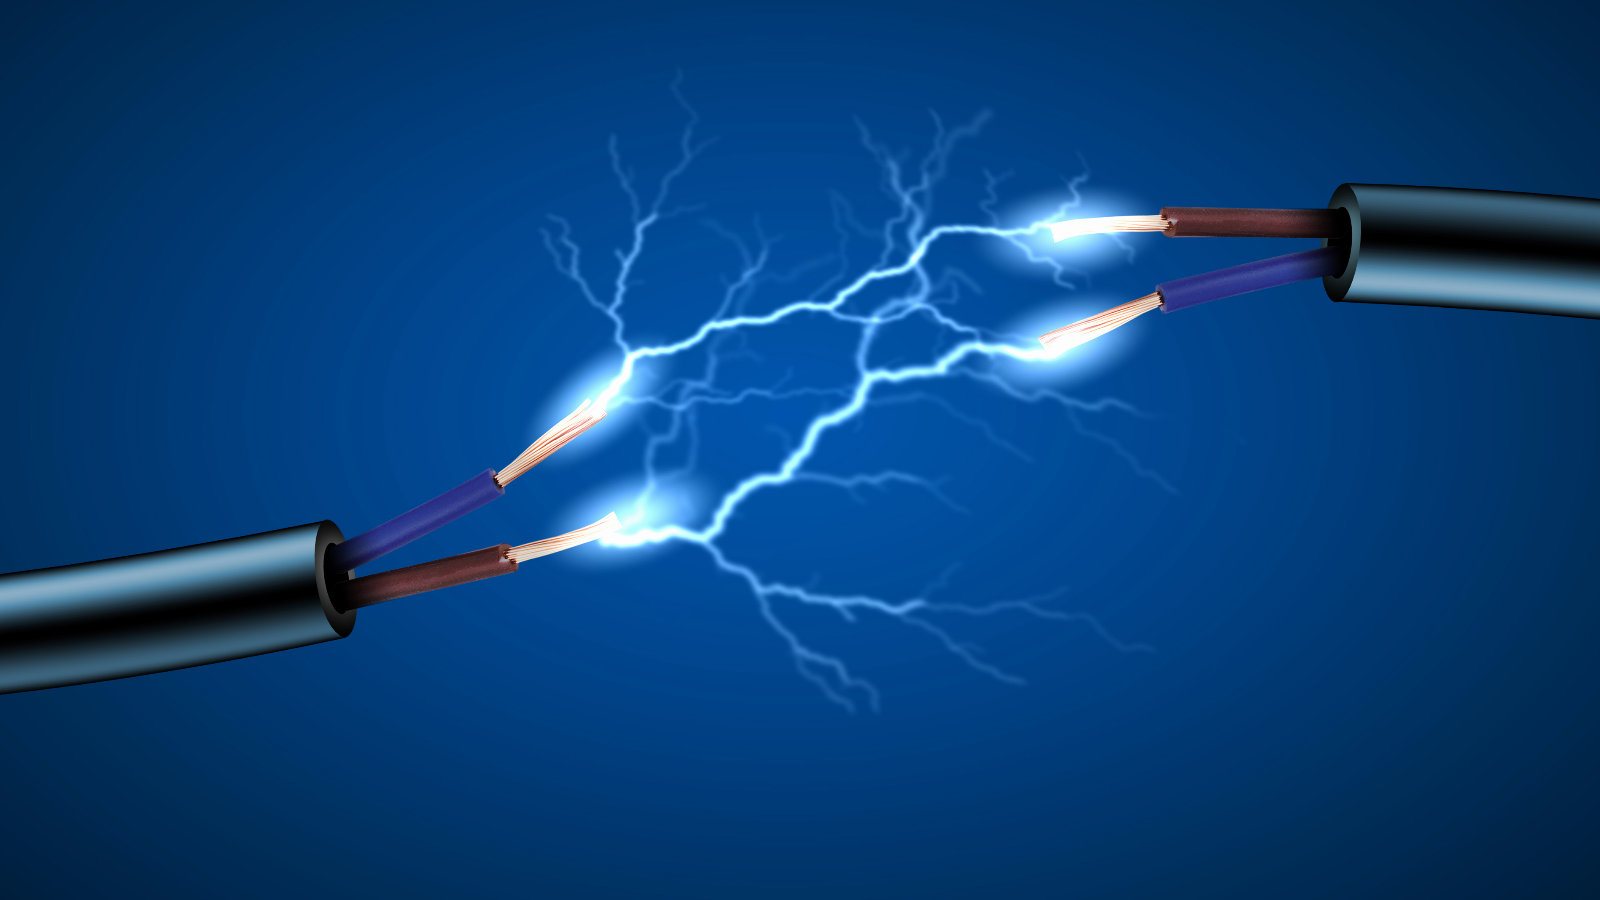 793835 Electrical Engineering Wallpapers Uncategorized Backgrounds